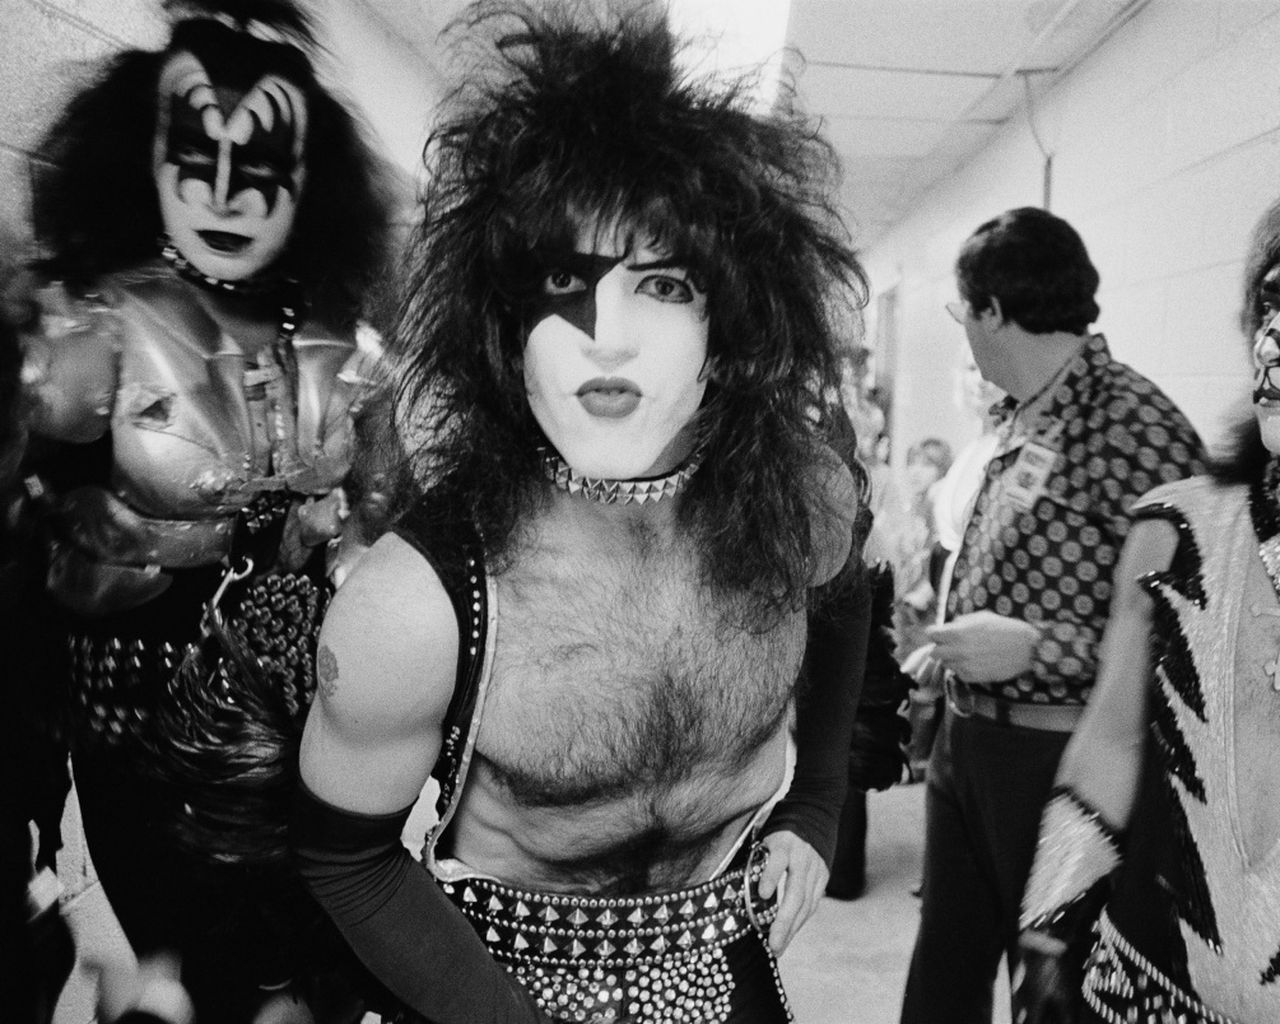 Please join me here at in wishing the one and only Paul Stanley a very Happy 69th Birthday today  